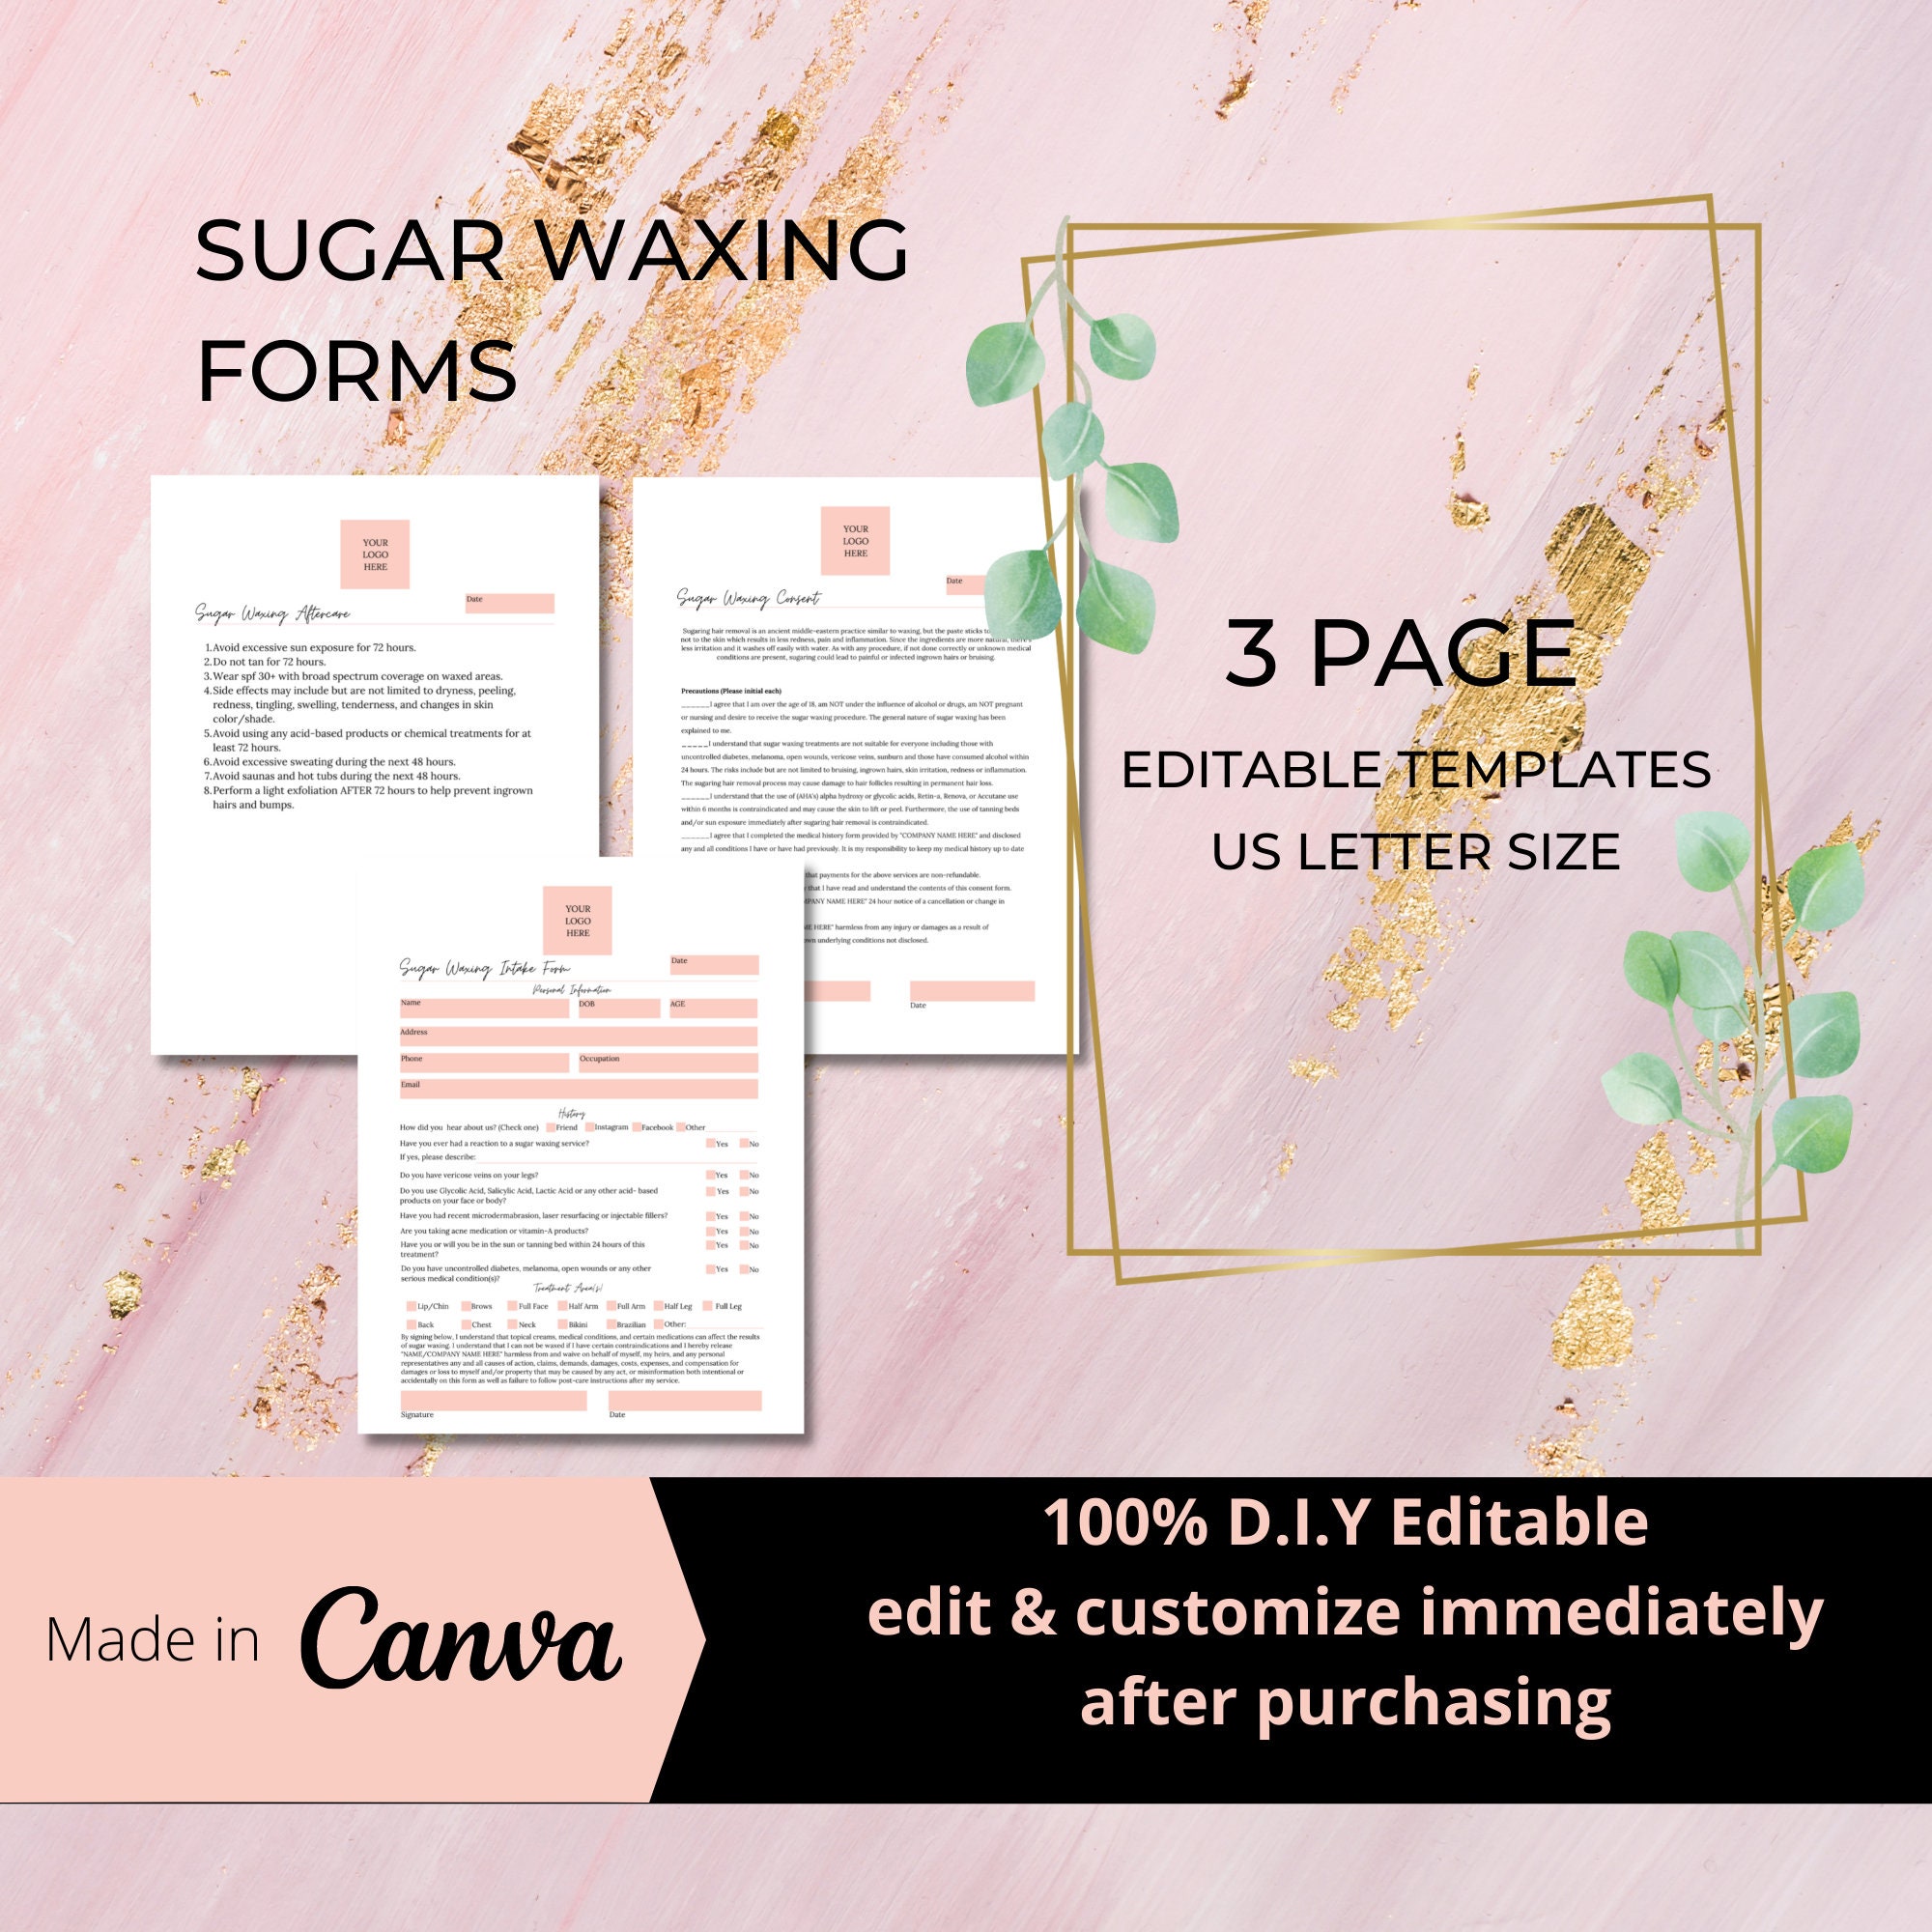 Sugaring Intake Forms Clients to Sign Before waxing: Intake  Consent  and Aftercare (75 Pack 25 of Each Form) 8.5 x 11” After Your Wax Appointment - 5